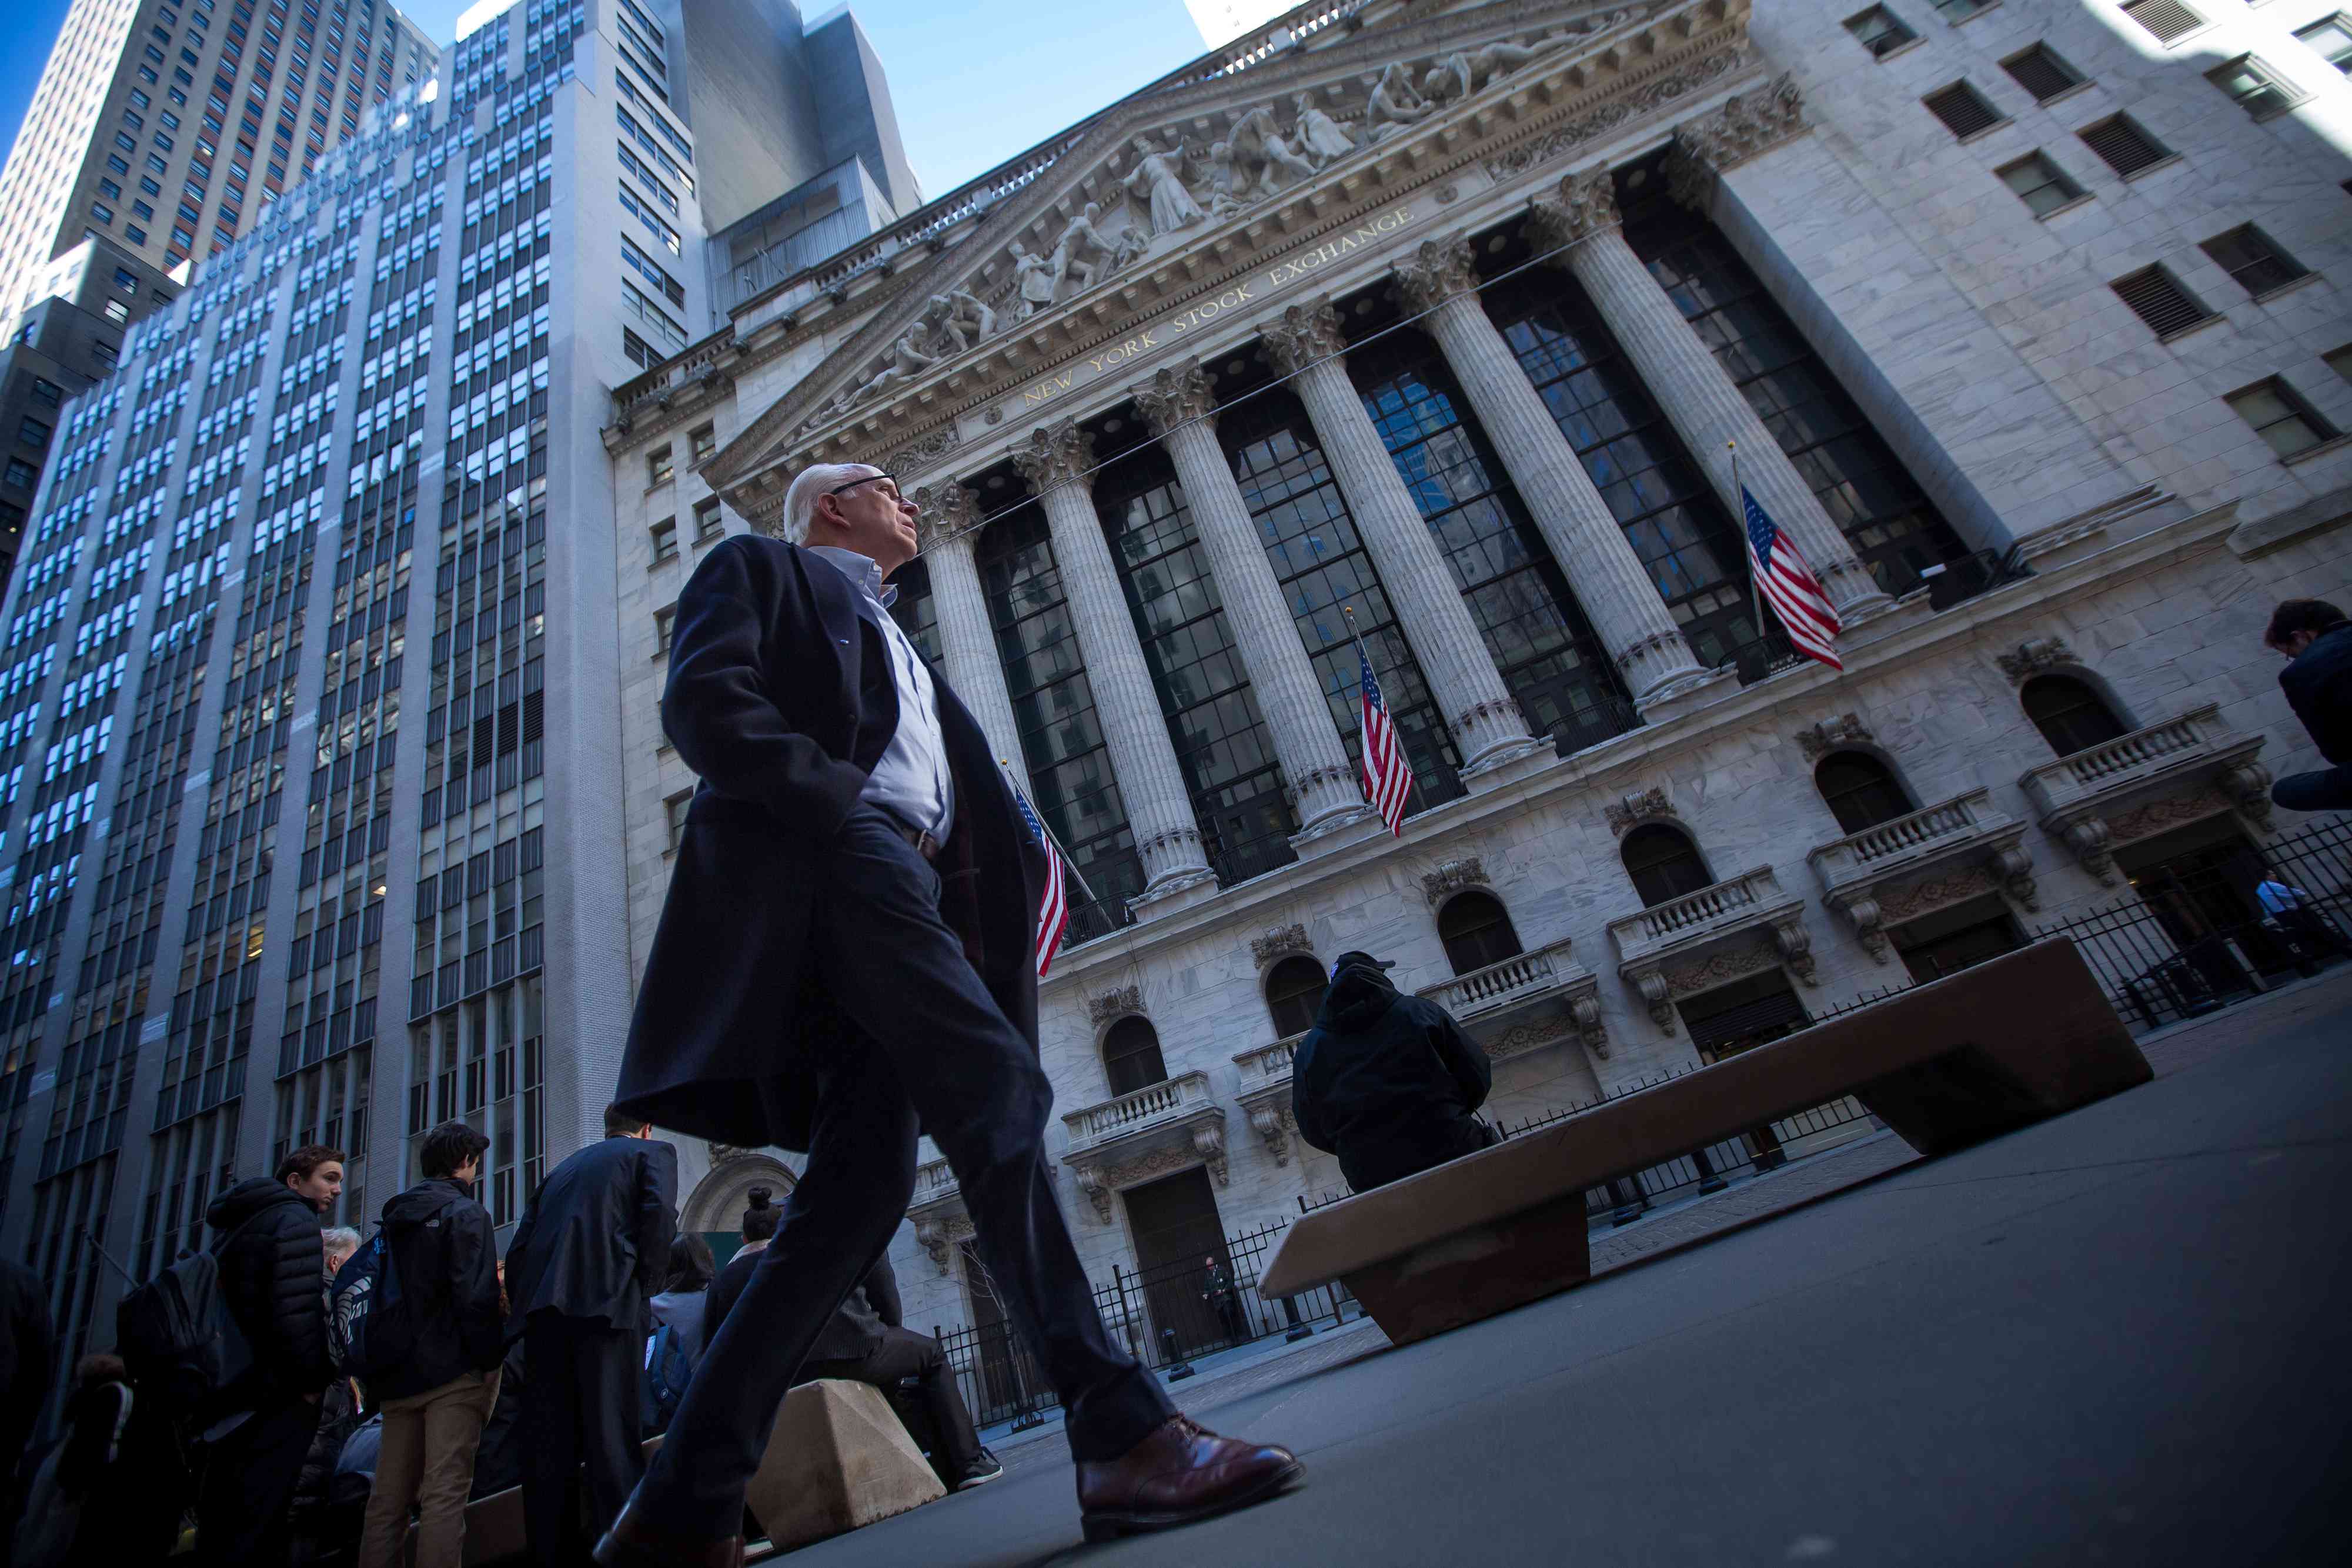 A man walks past the New York Stock Exchange building in New York City